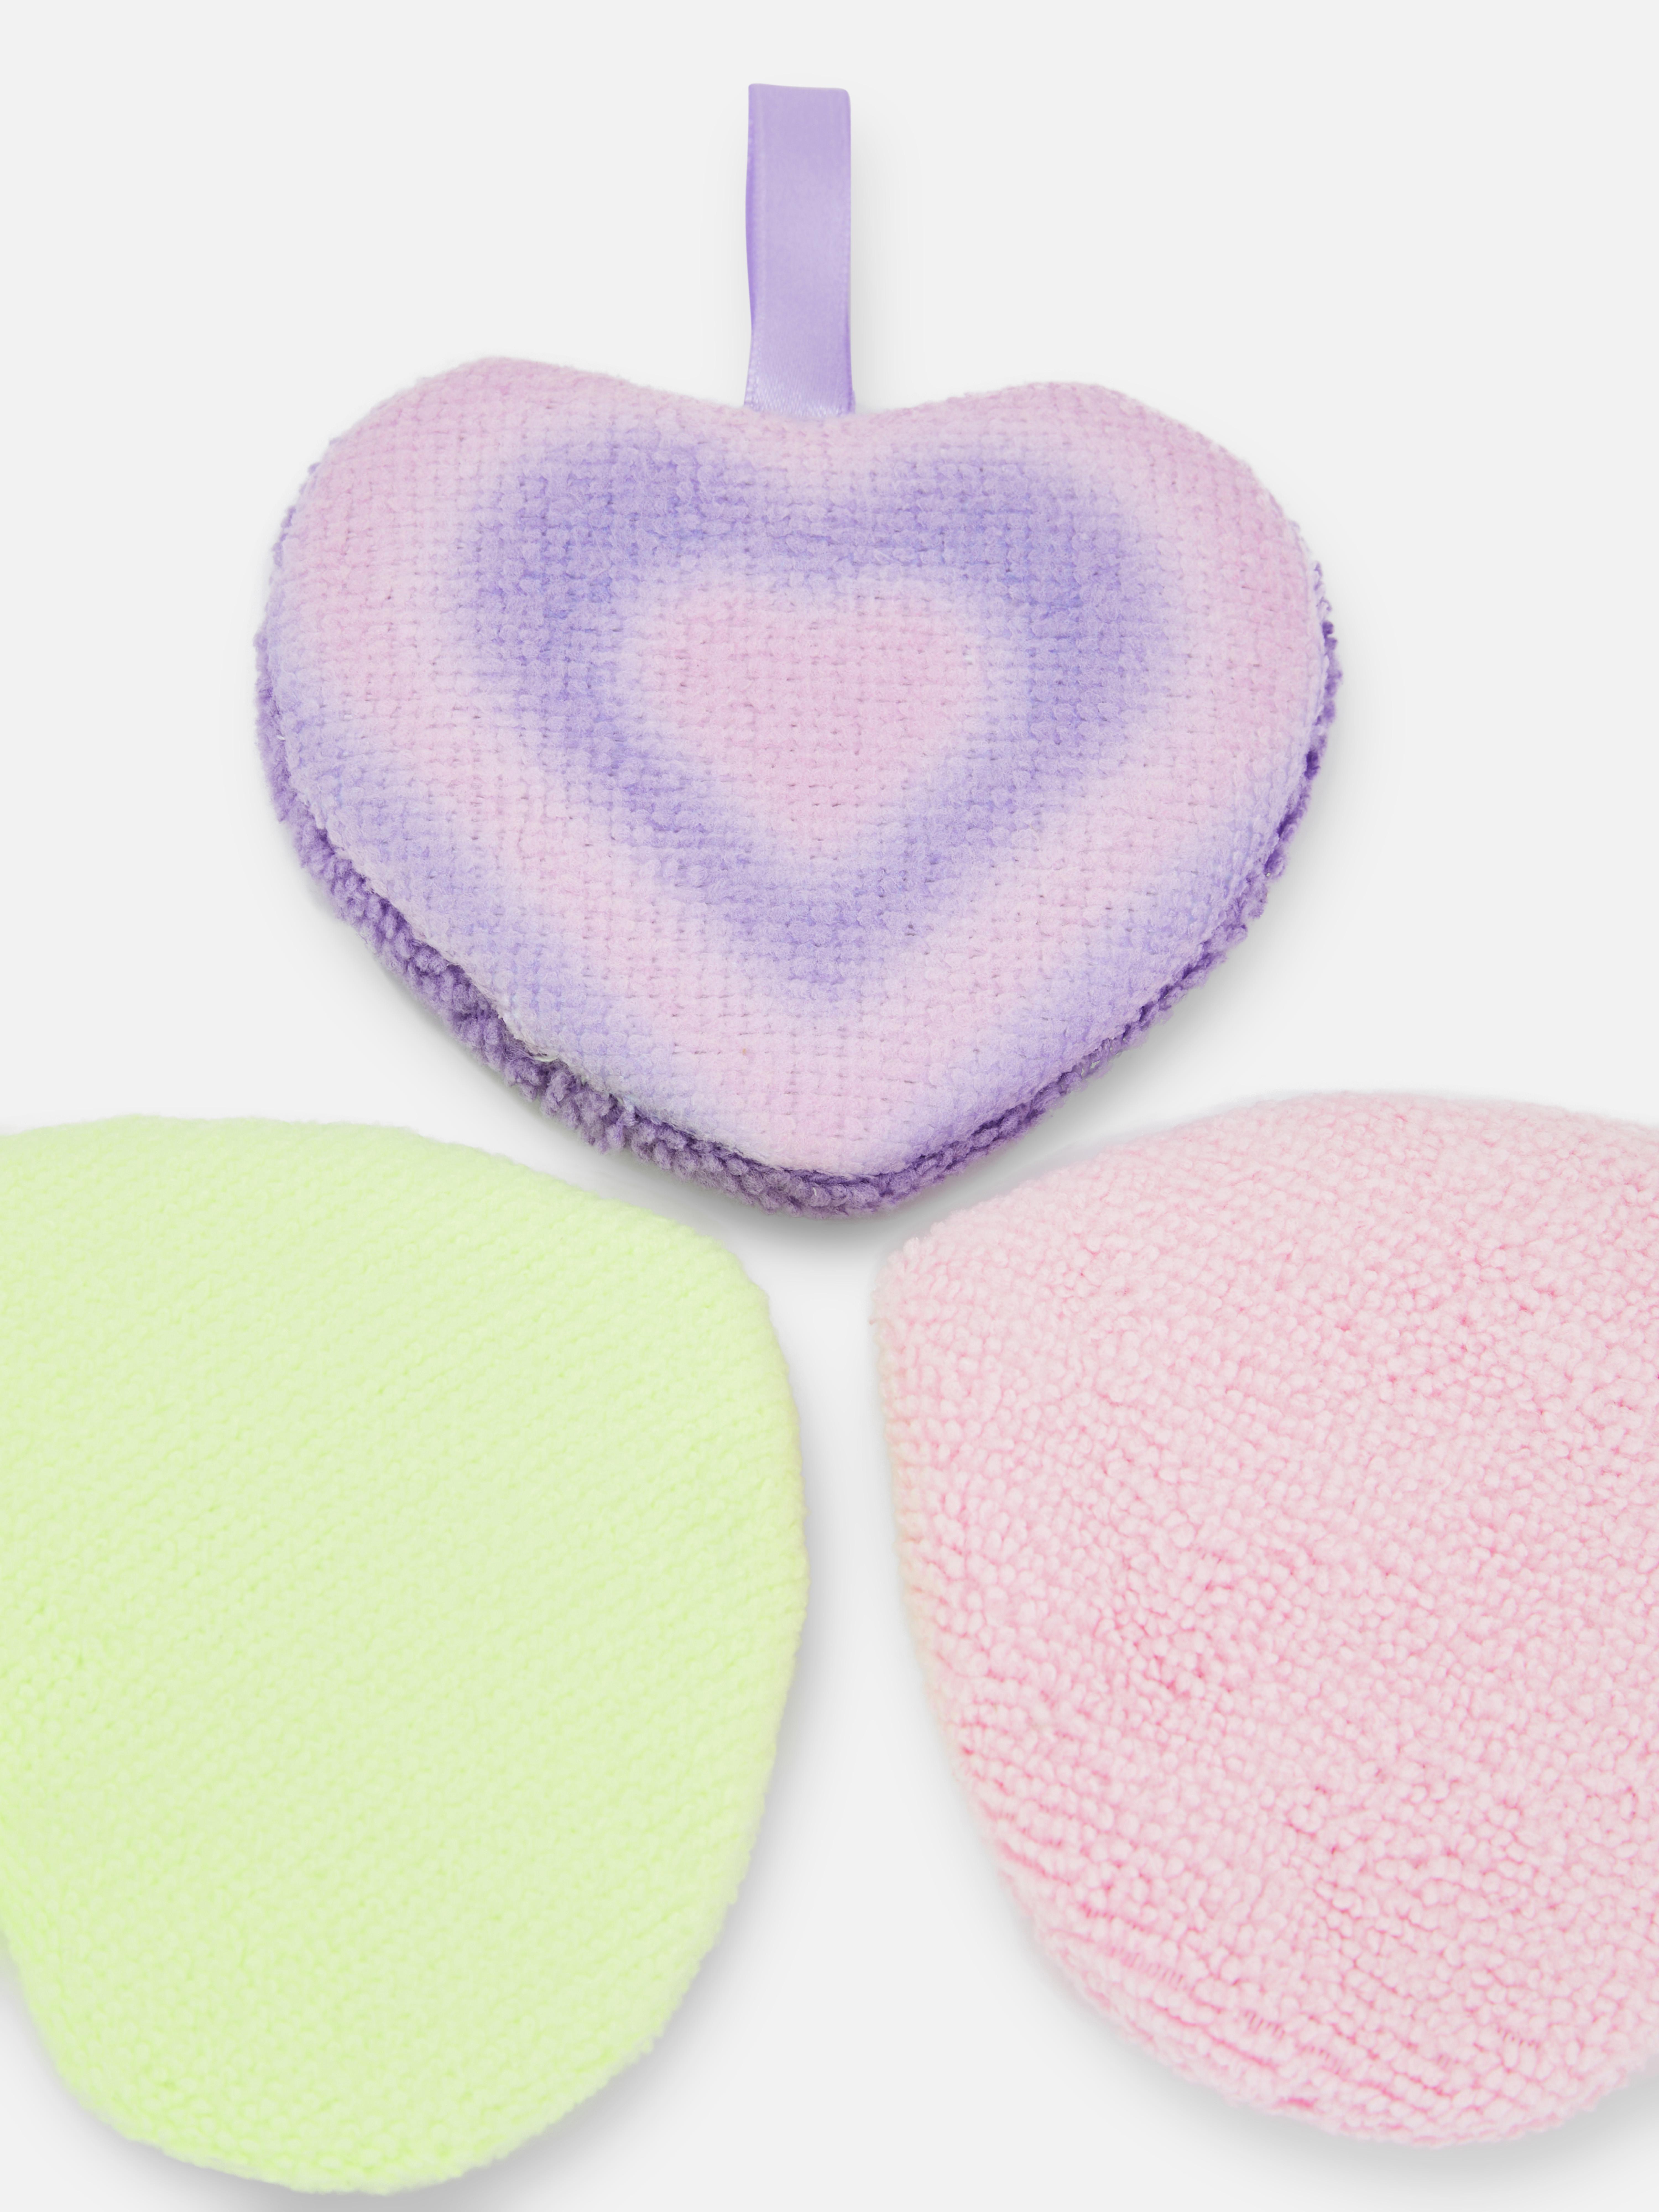 PS... 3pk Reusable Cleansing Pads